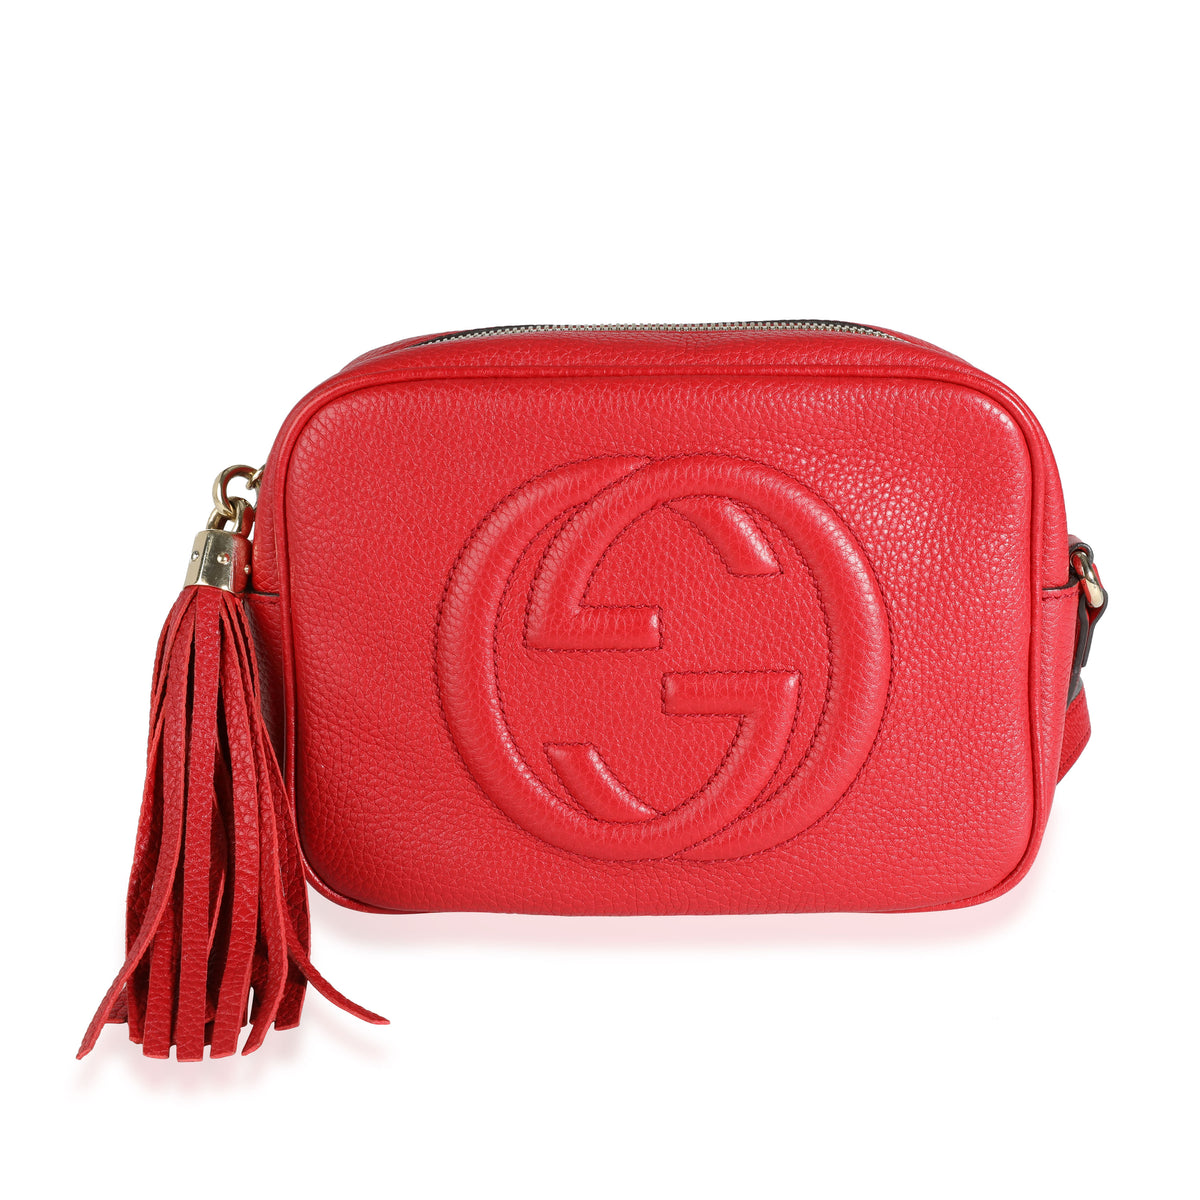 Gucci - Soho Red Grained Leather Small Round Bag